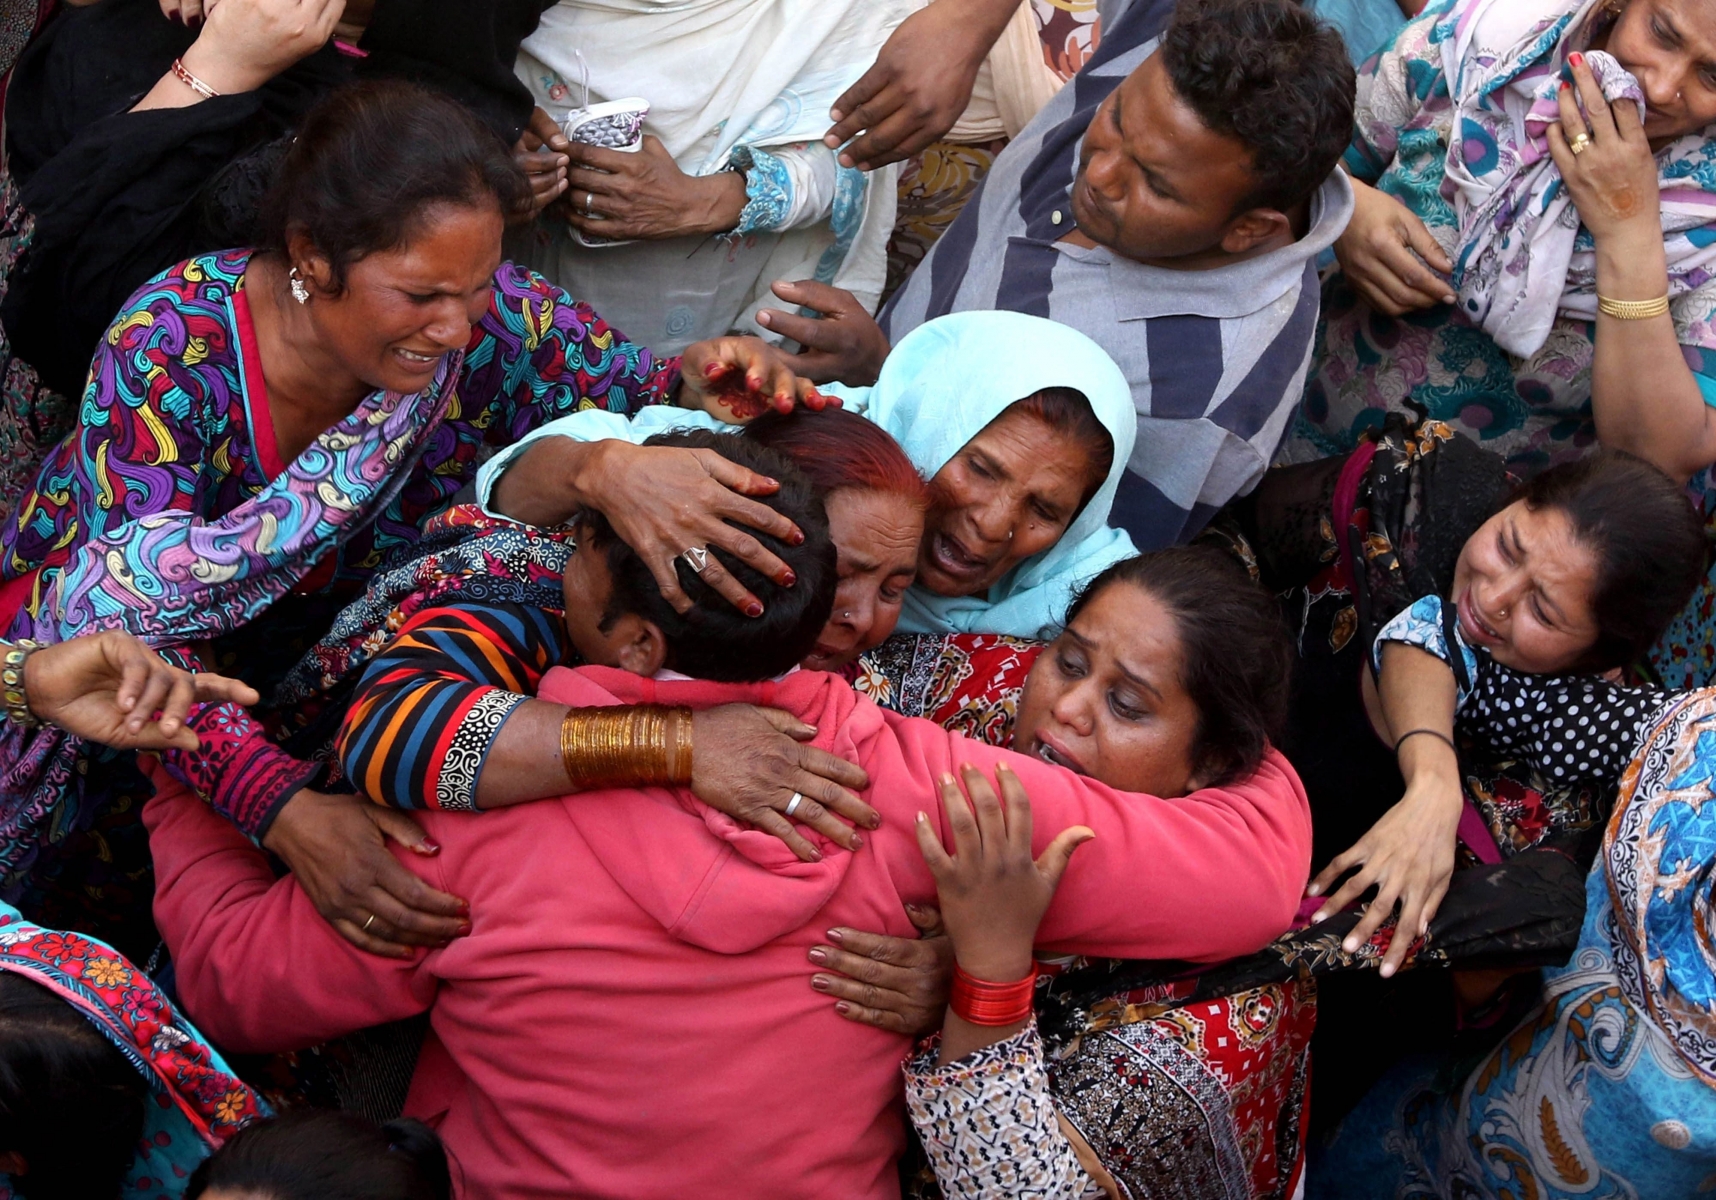 epa05233361 People cry during the funeral of their loved ones a day after a suicide bomb attack at a park, in Lahore, Pakistan, 28 March 2016. At least 70 people, including women and children, were killed in a suicide bomb attack on 27 March that targeted a public park in Lahore. Some 340 people were reportedly injured in the attack claimed by a splinter group of the Pakistani Taliban.  EPA/RAHAT DAR PAKISTAN SUICIDE BOMB BLAST AFTERMATH